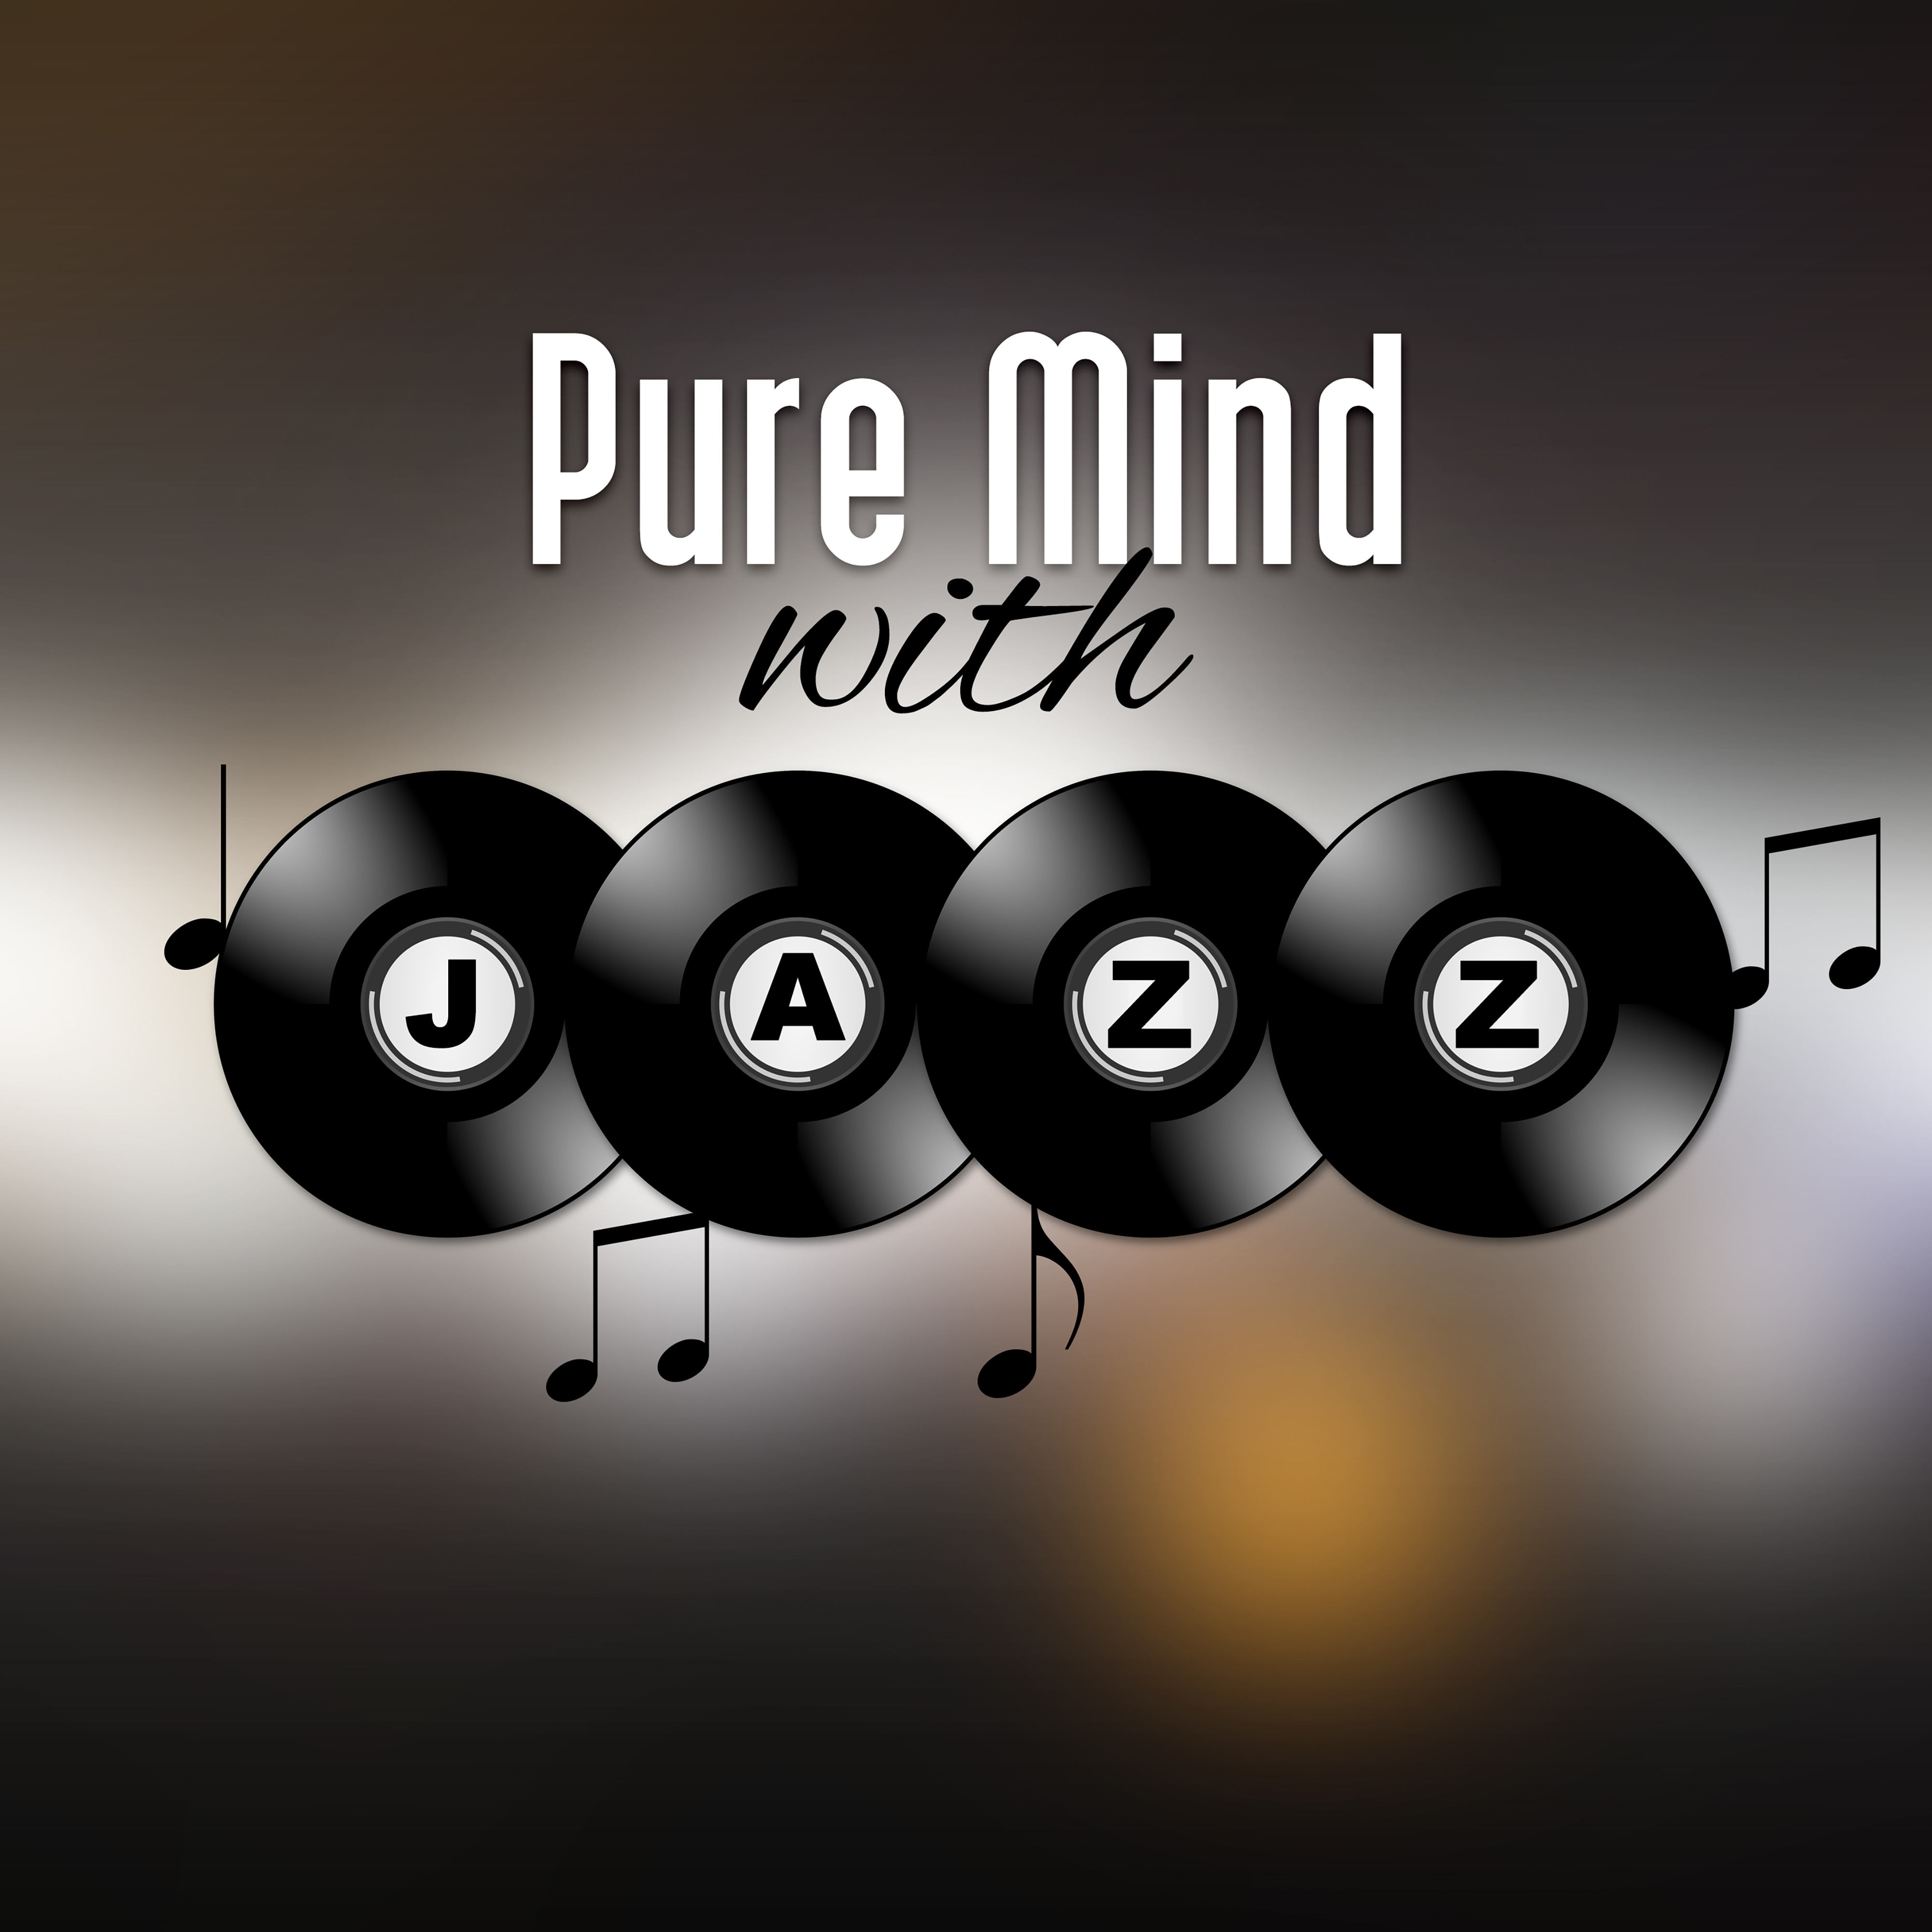 Pure Mind with Jazz – Instrumental Music for Relaxation, Piano Lounge, Chillout Jazz, Gentle Guitar, Saxophone, Relaxed Brain